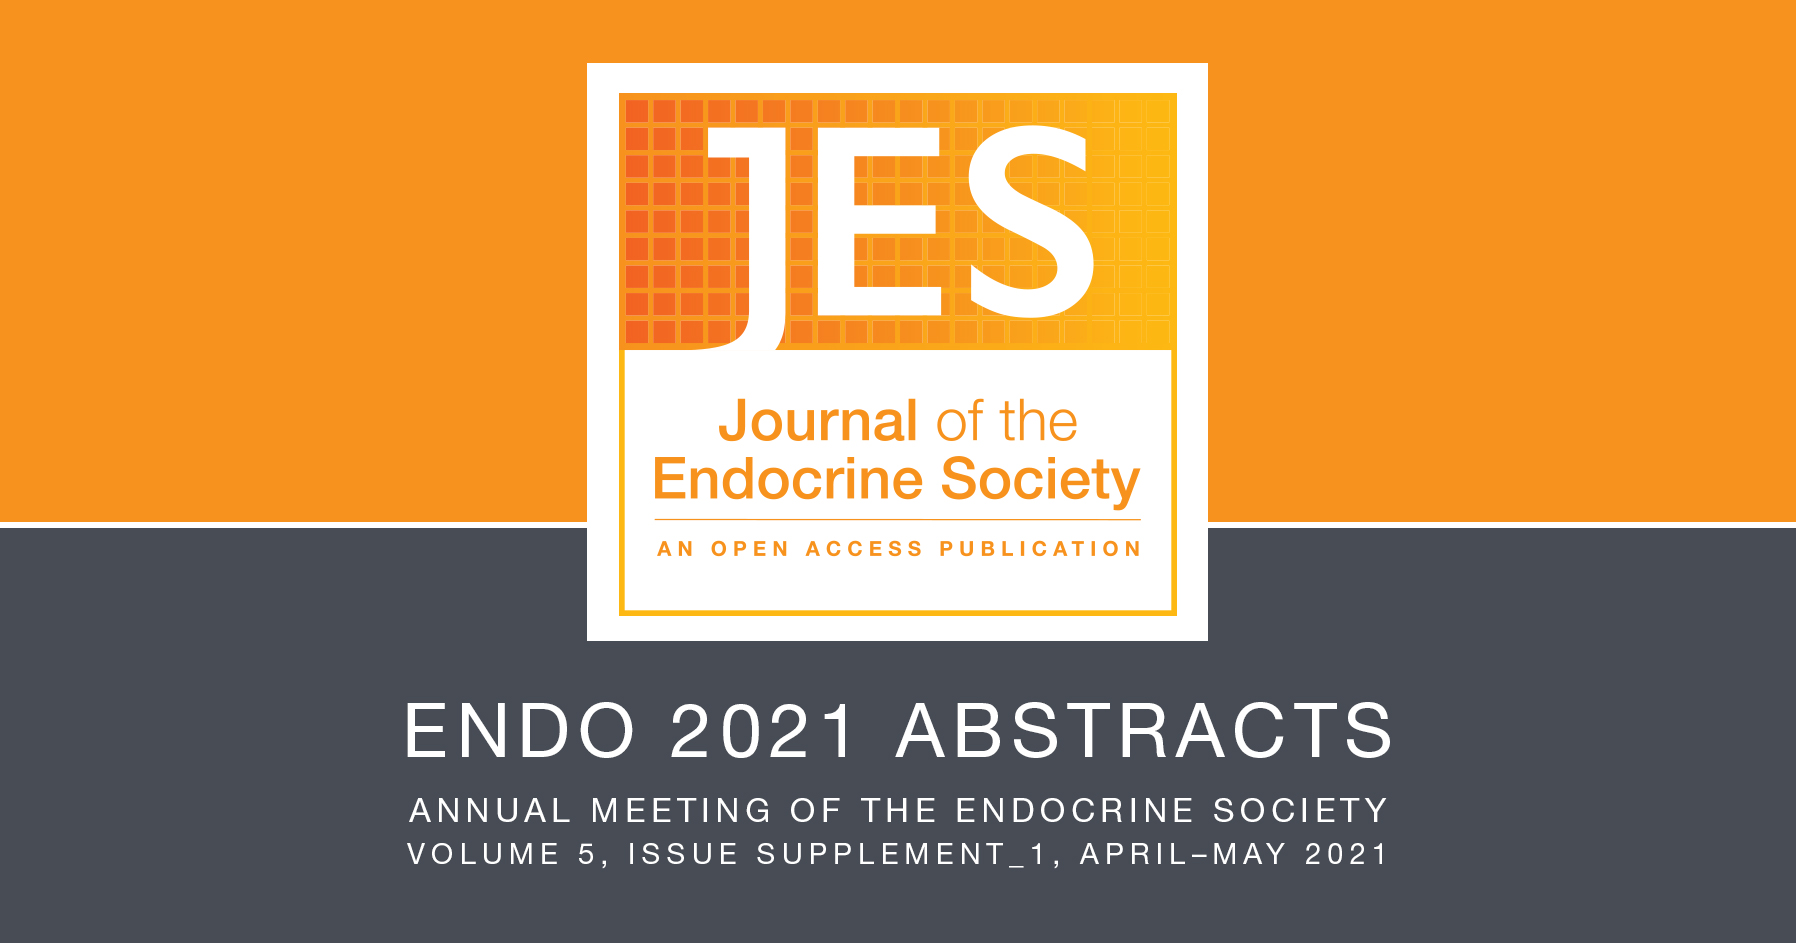 ENDO 2021 Abstracts Available in JES Endocrine Society